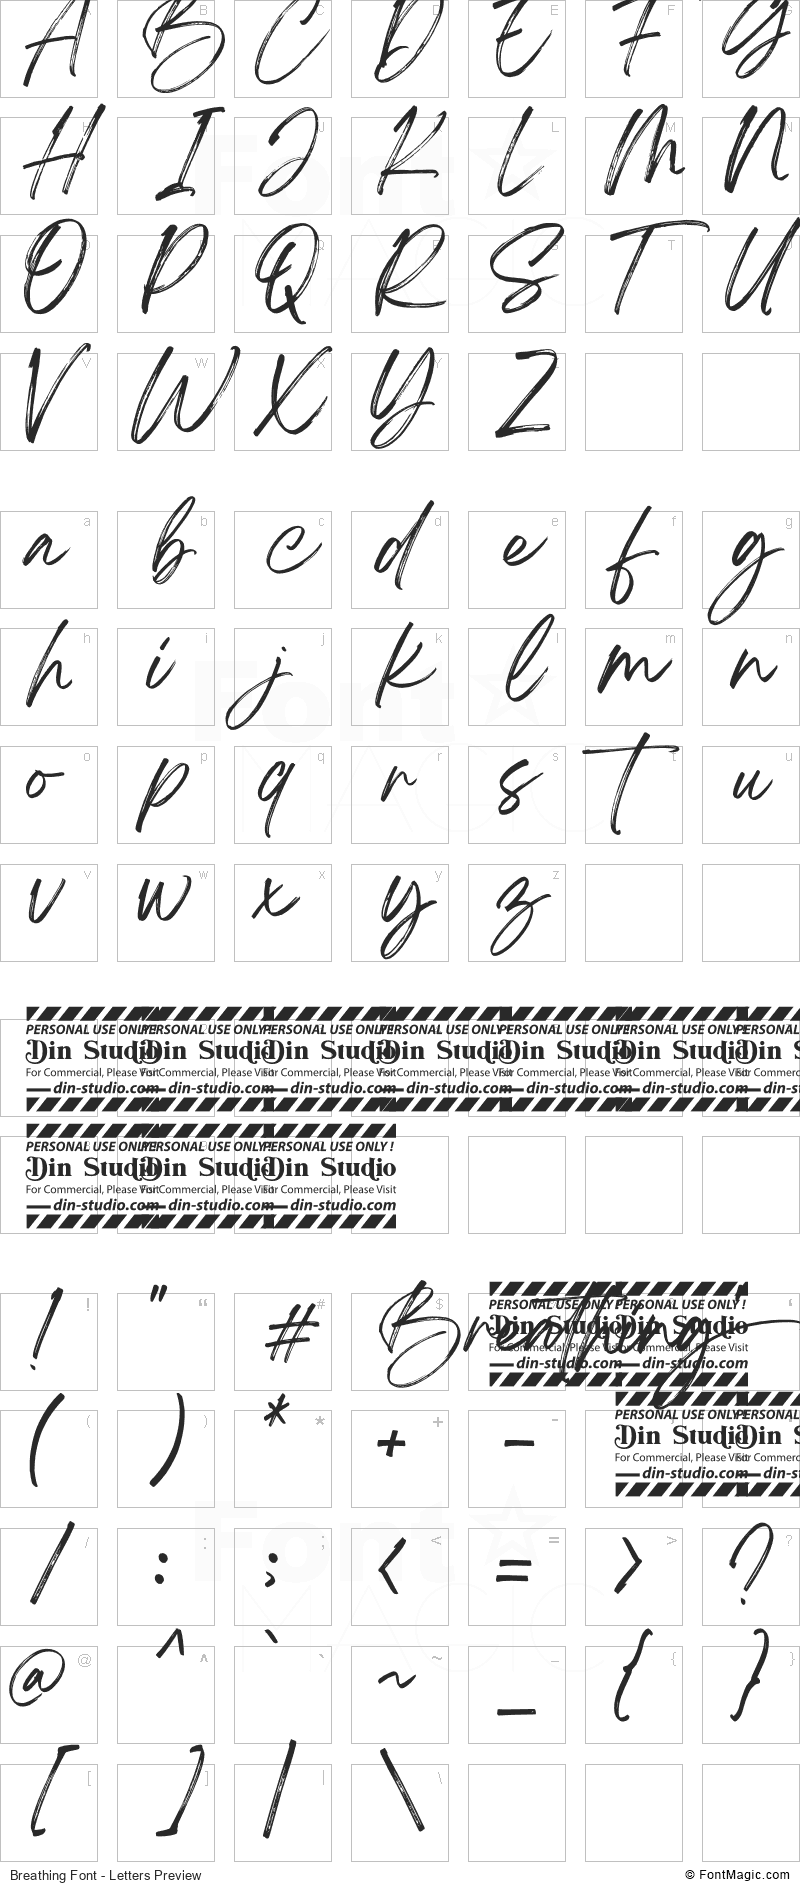 Breathing Font - All Latters Preview Chart